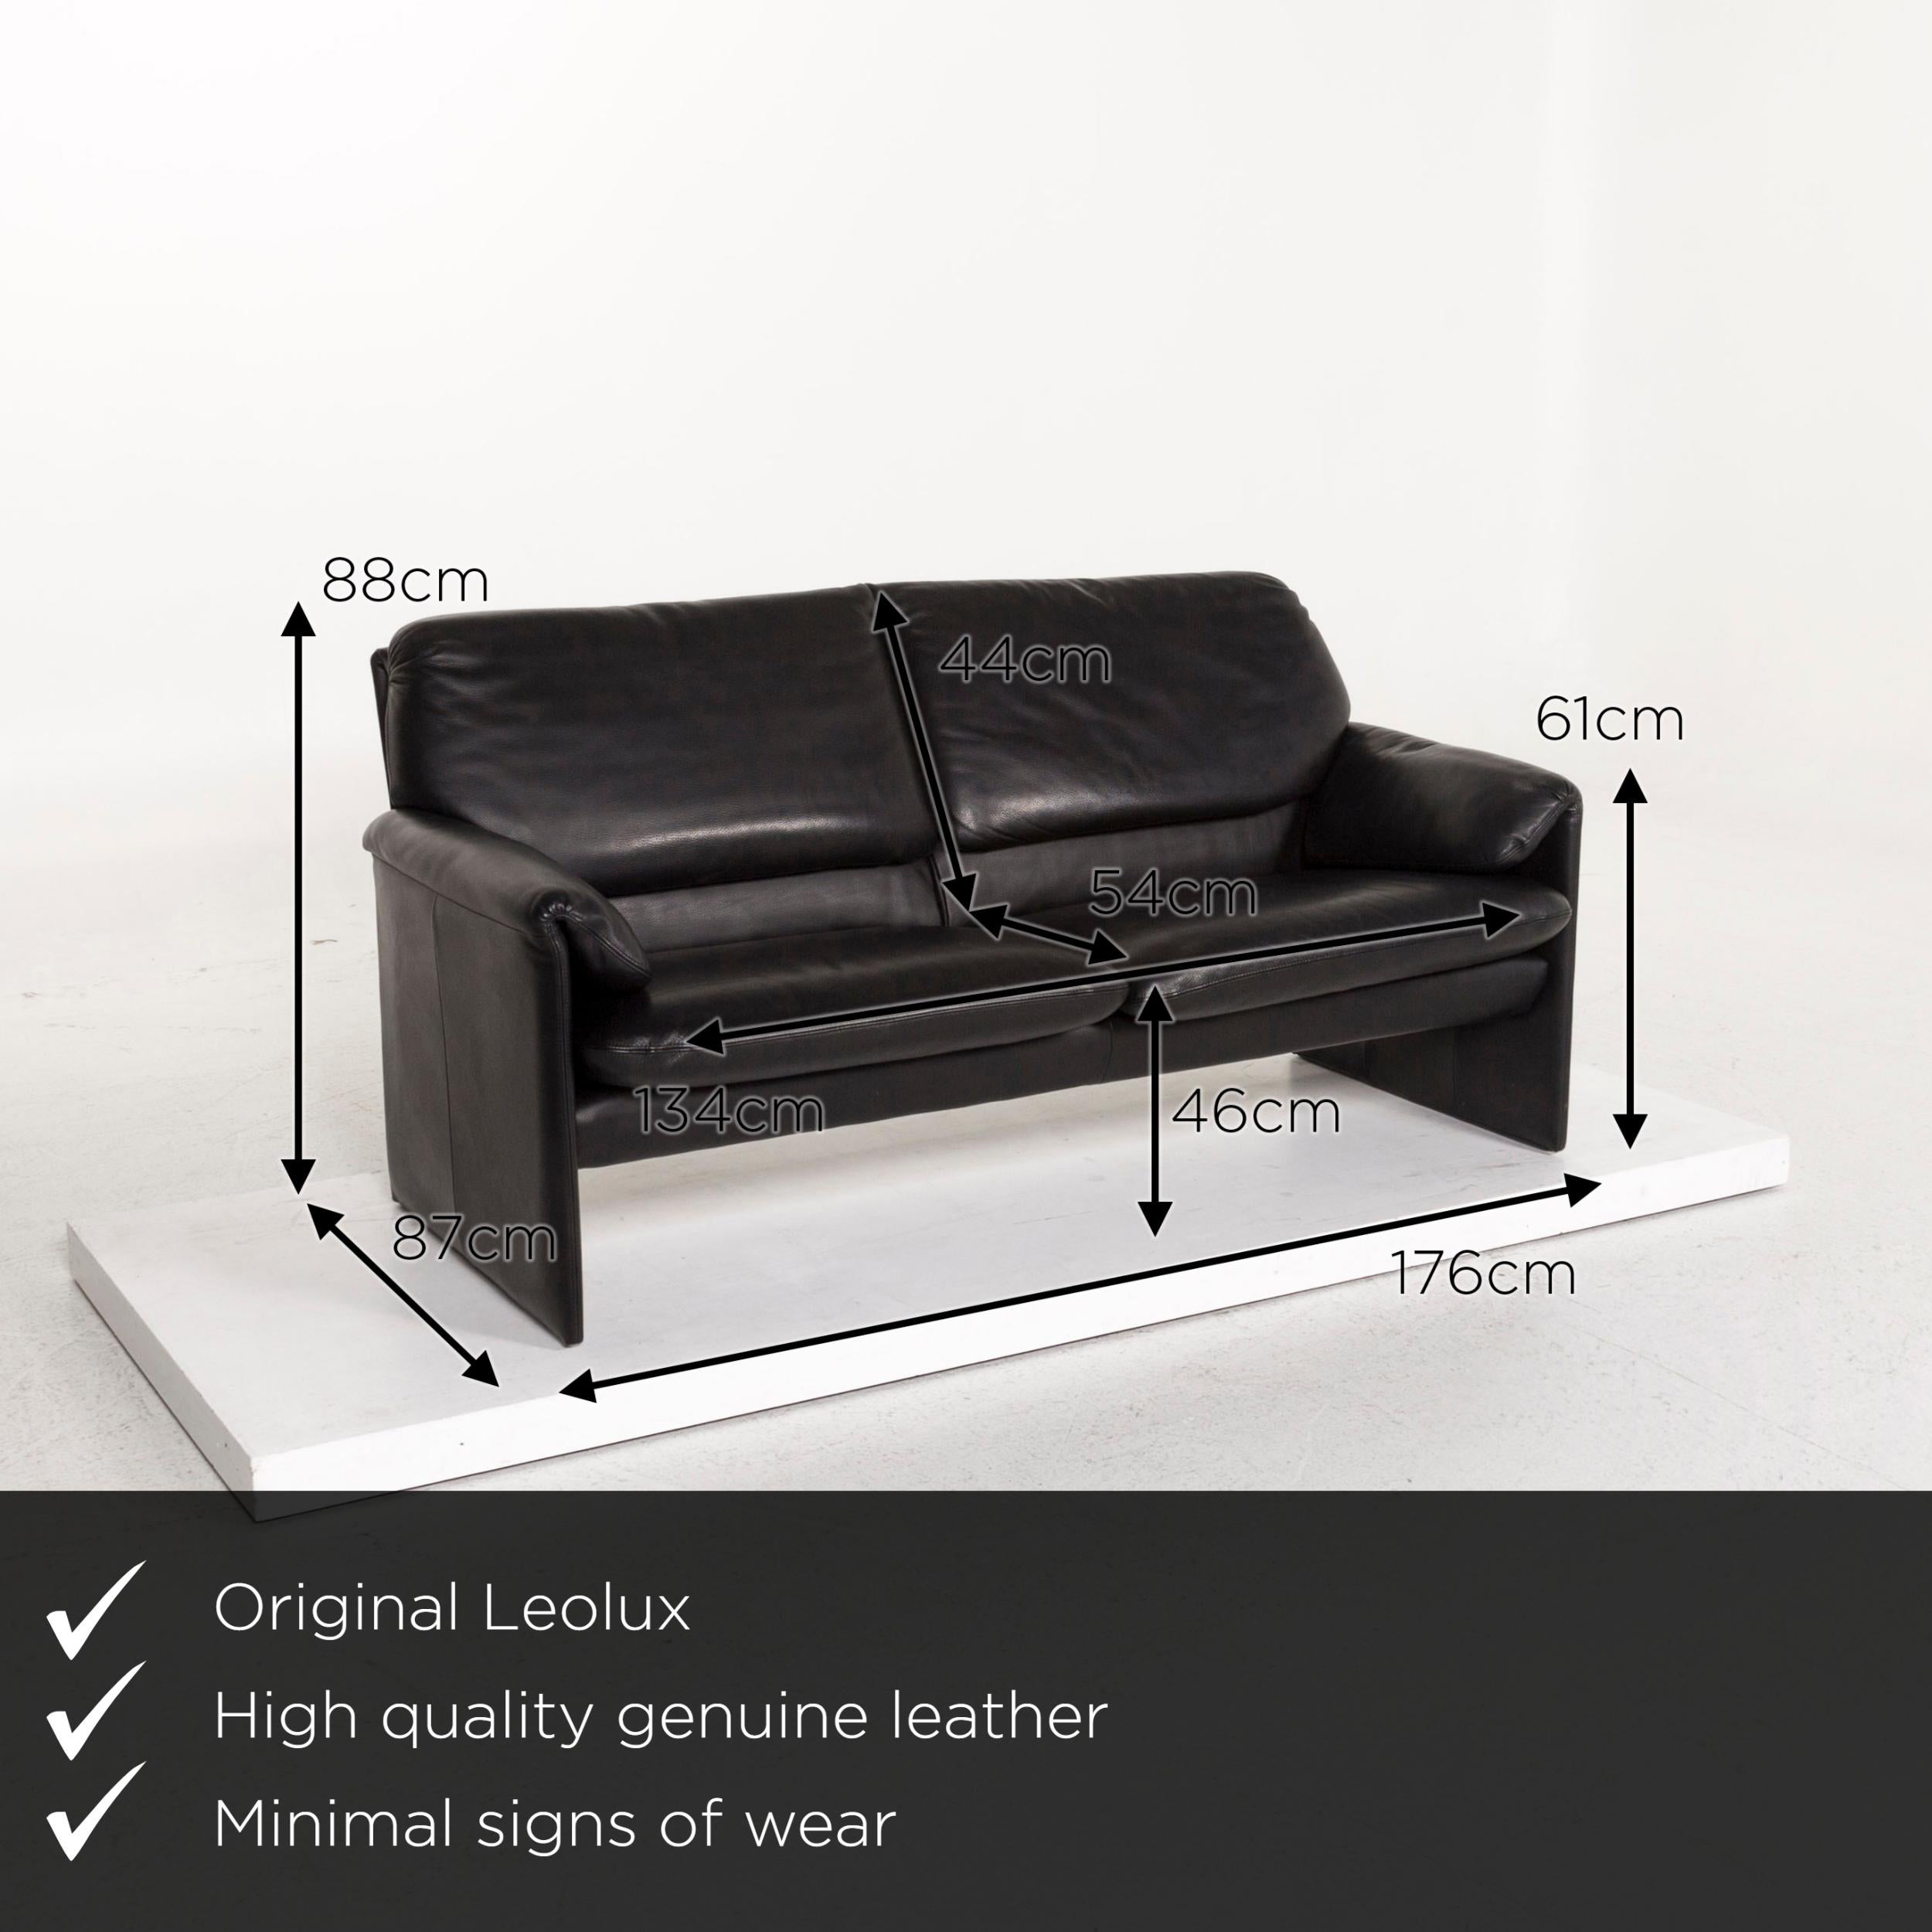 We present to you a Leolux leather sofa black two-seat couch.



 Product measurements in centimeters:
 

Depth 87
Width 176
Height 88
Seat height 46
Rest height 61
Seat depth 54
Seat width 134
Back height 44.
 